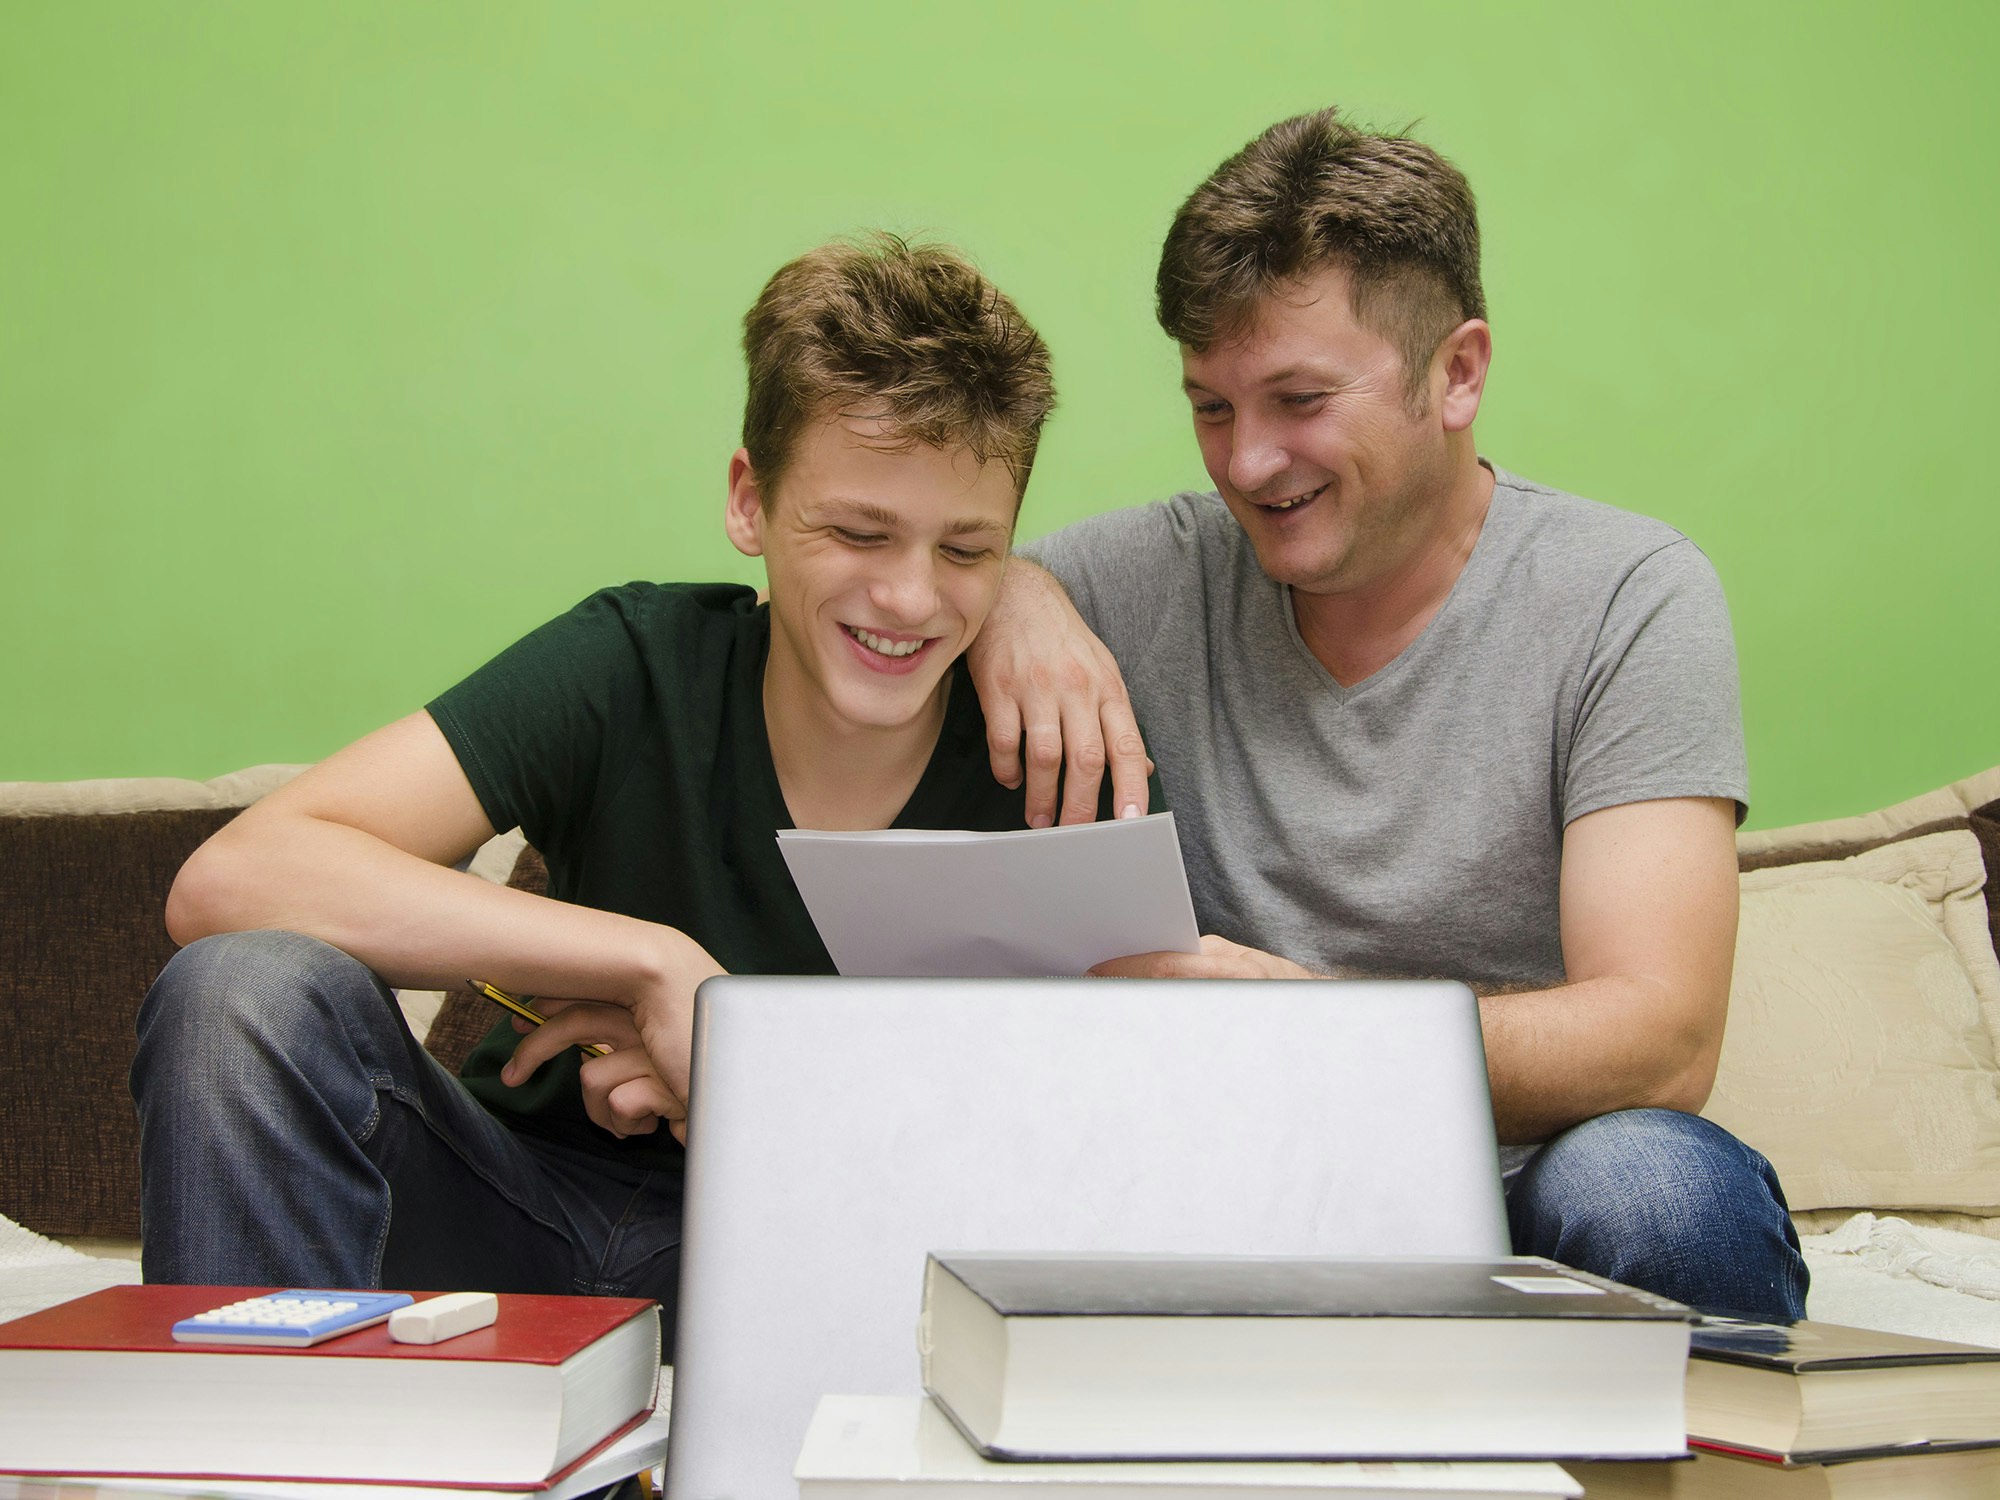 Parents of autistic young people believe their children&#8217;s unique skills will help them achieve their full potential when teamed with flexible and modified workplaces (Source: Shutterstock)
